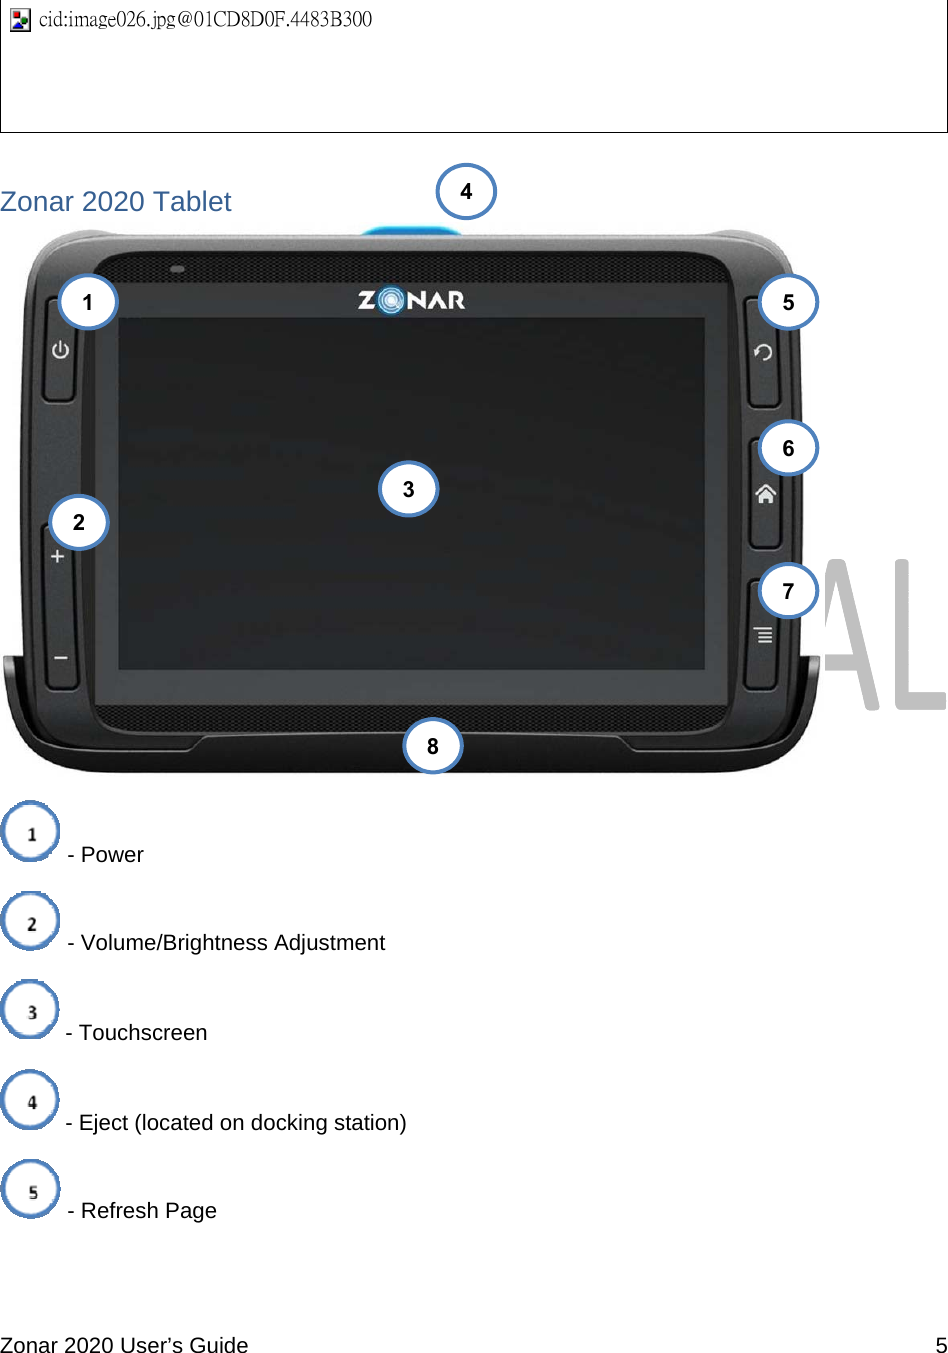  Zonar 2020 User’s Guide    5  cid:image026.jpg@01CD8D0F.4483B300 Zonar 2020 Tablet   - Power  - Volume/Brightness Adjustment  - Touchscreen  - Eject (located on docking station)  - Refresh Page 1 2 345 6 7 8